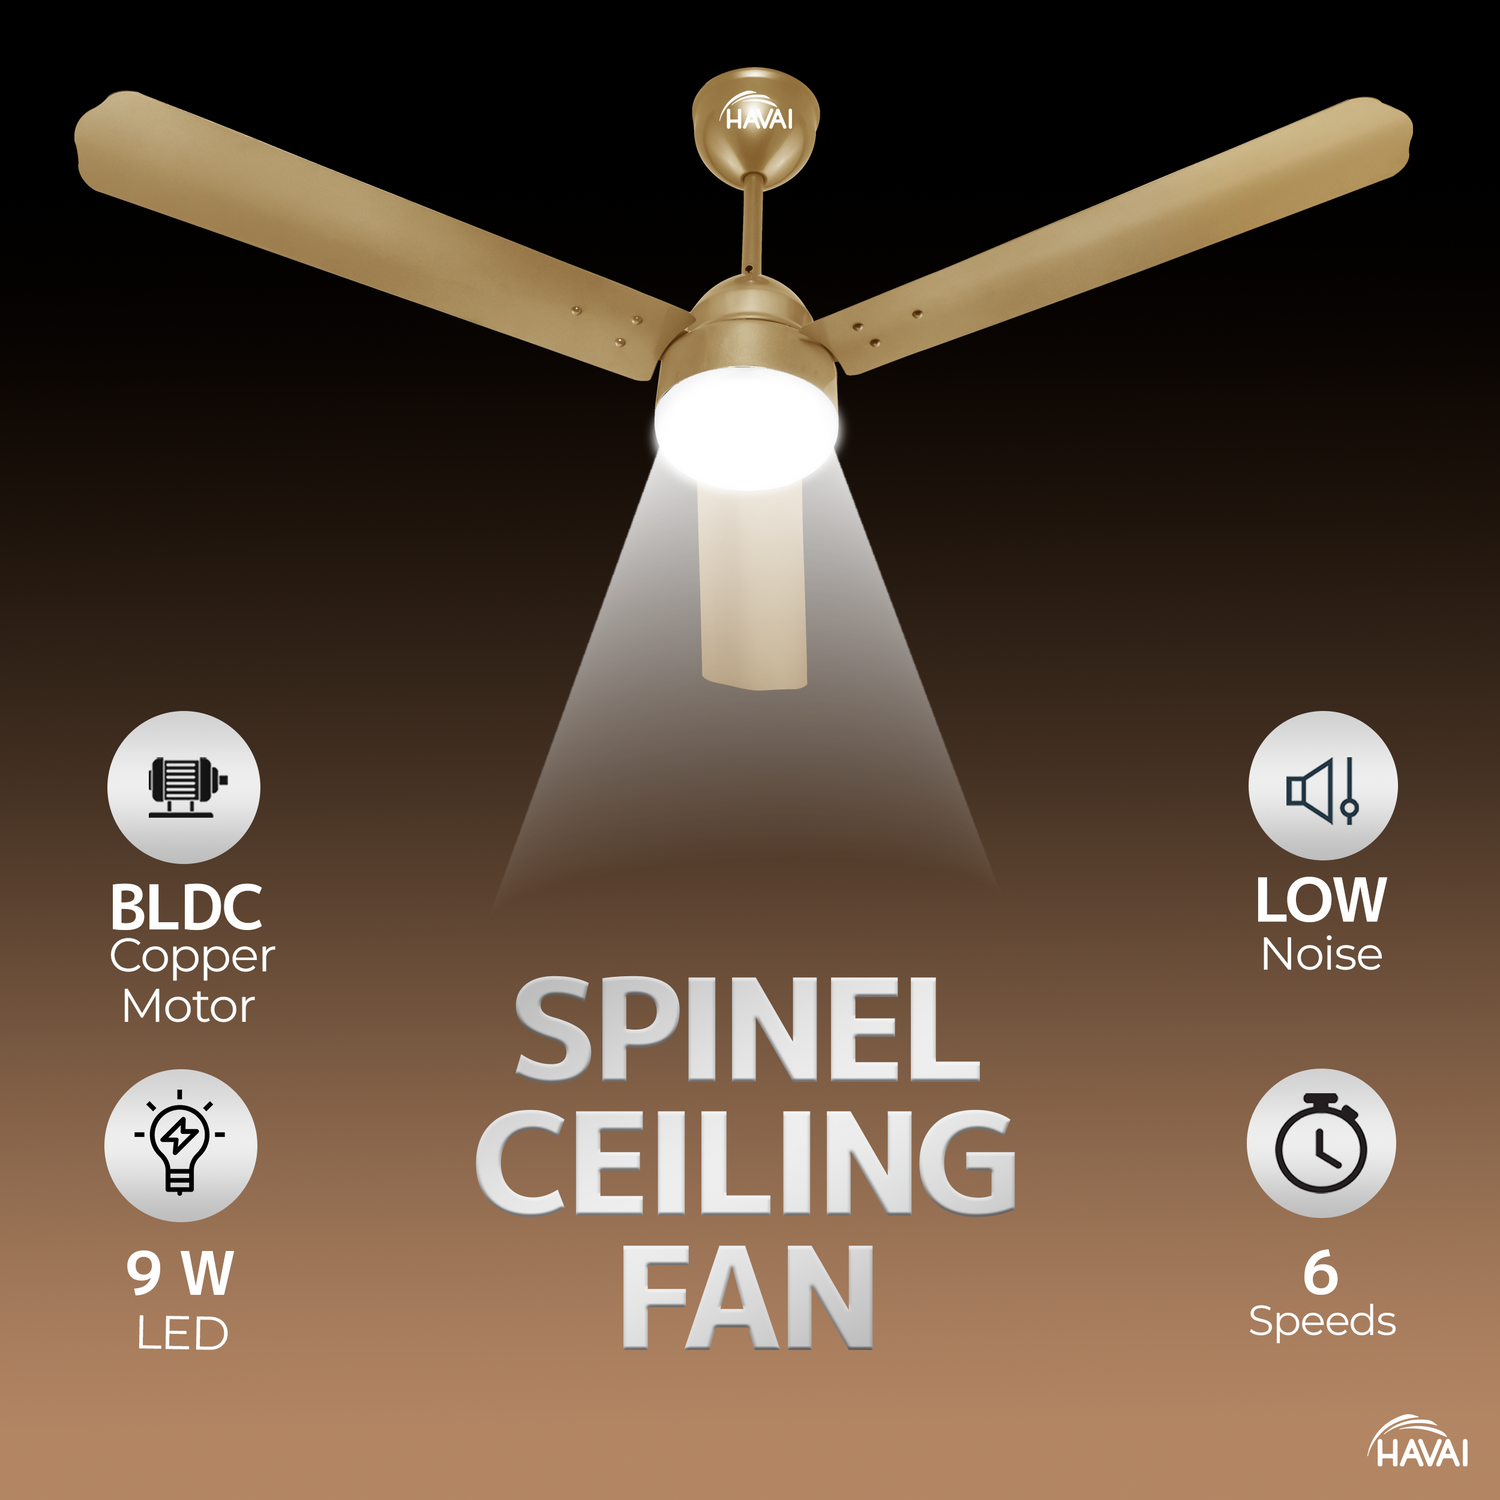 HAVAI Spinel BLDC Ceiling Fan 28W, 1200mm Blade with Remote - Champagne Yellow,9W LED Light